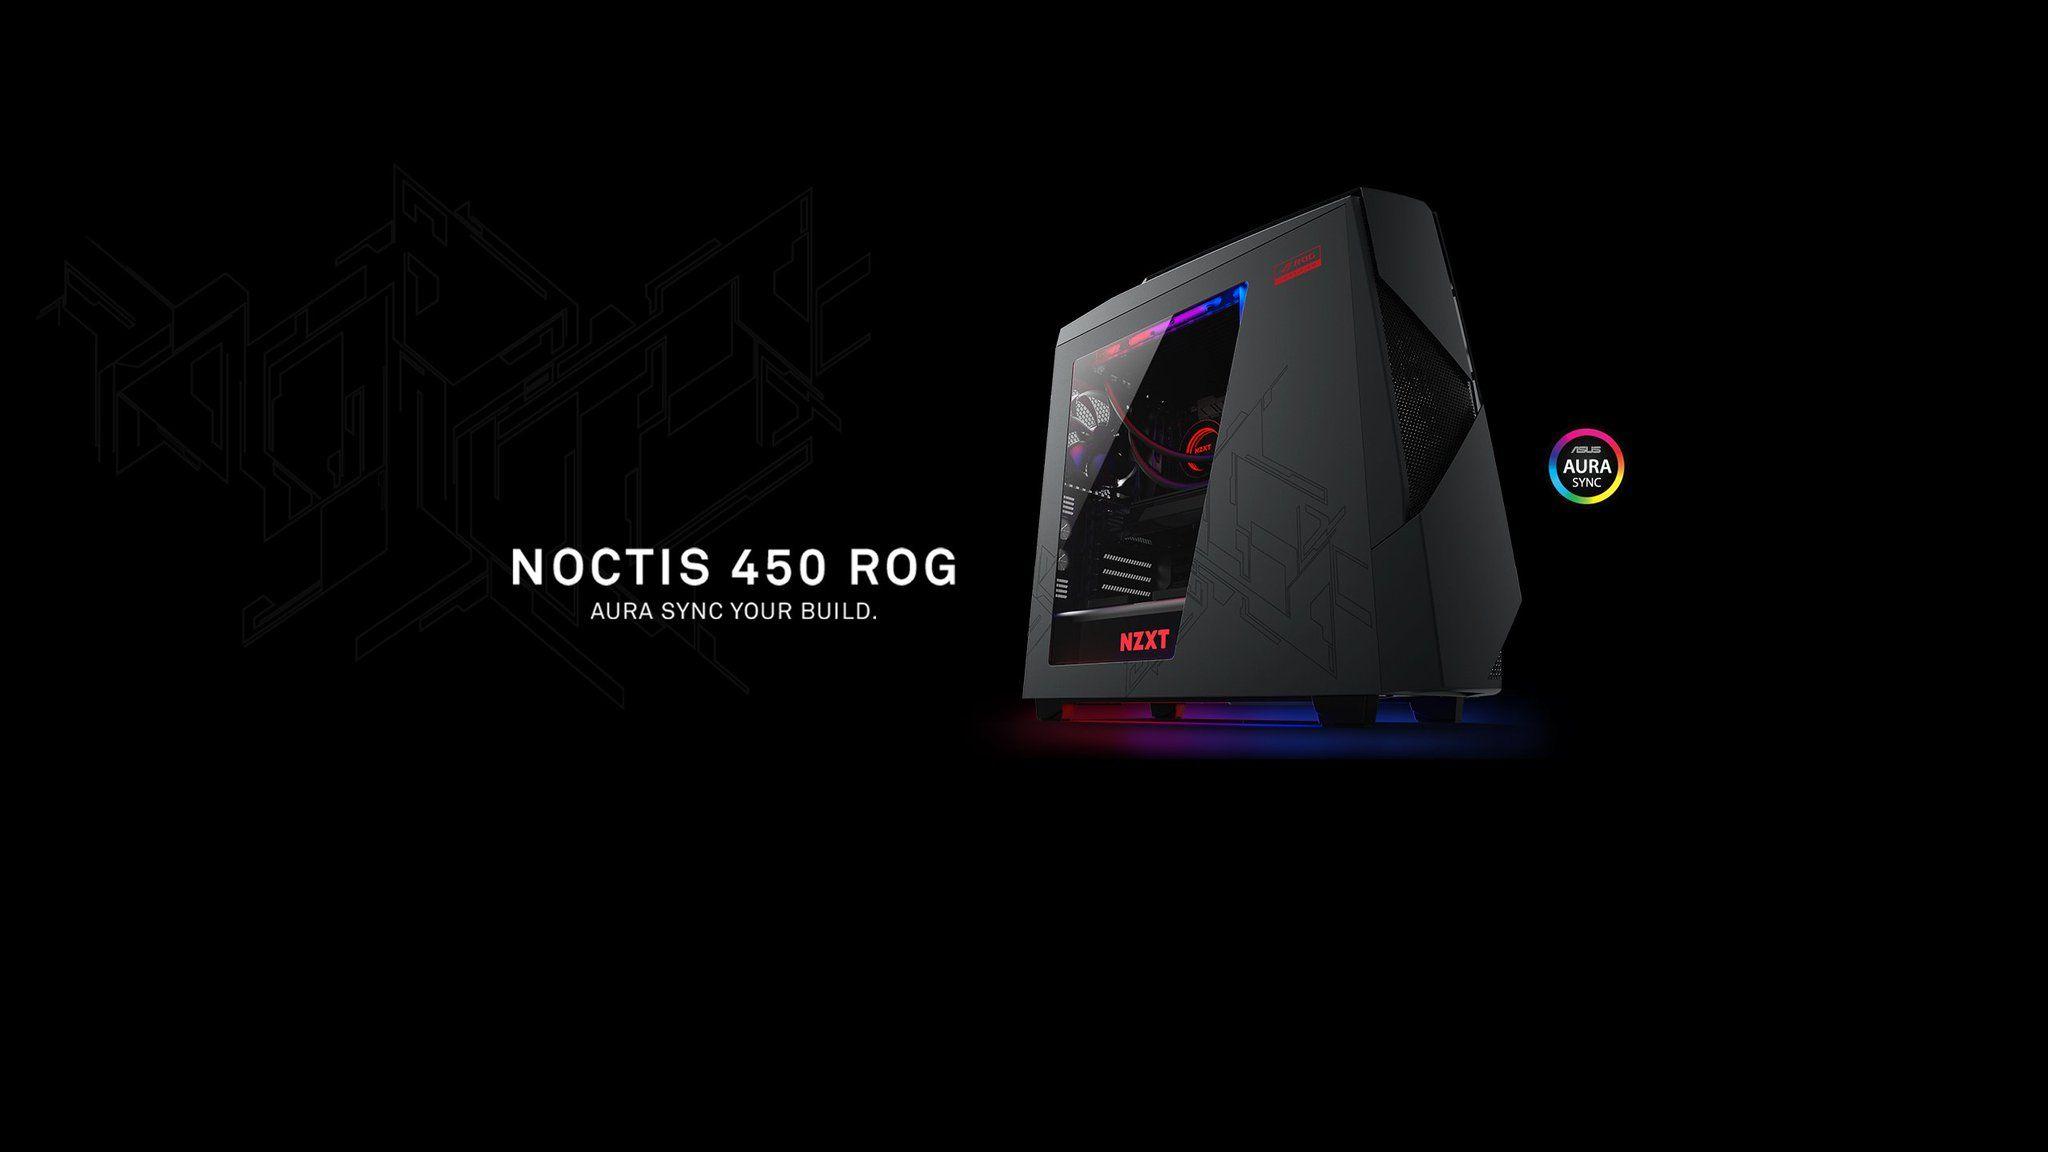 NZXT more awesome #NZXT wallpaper inside our